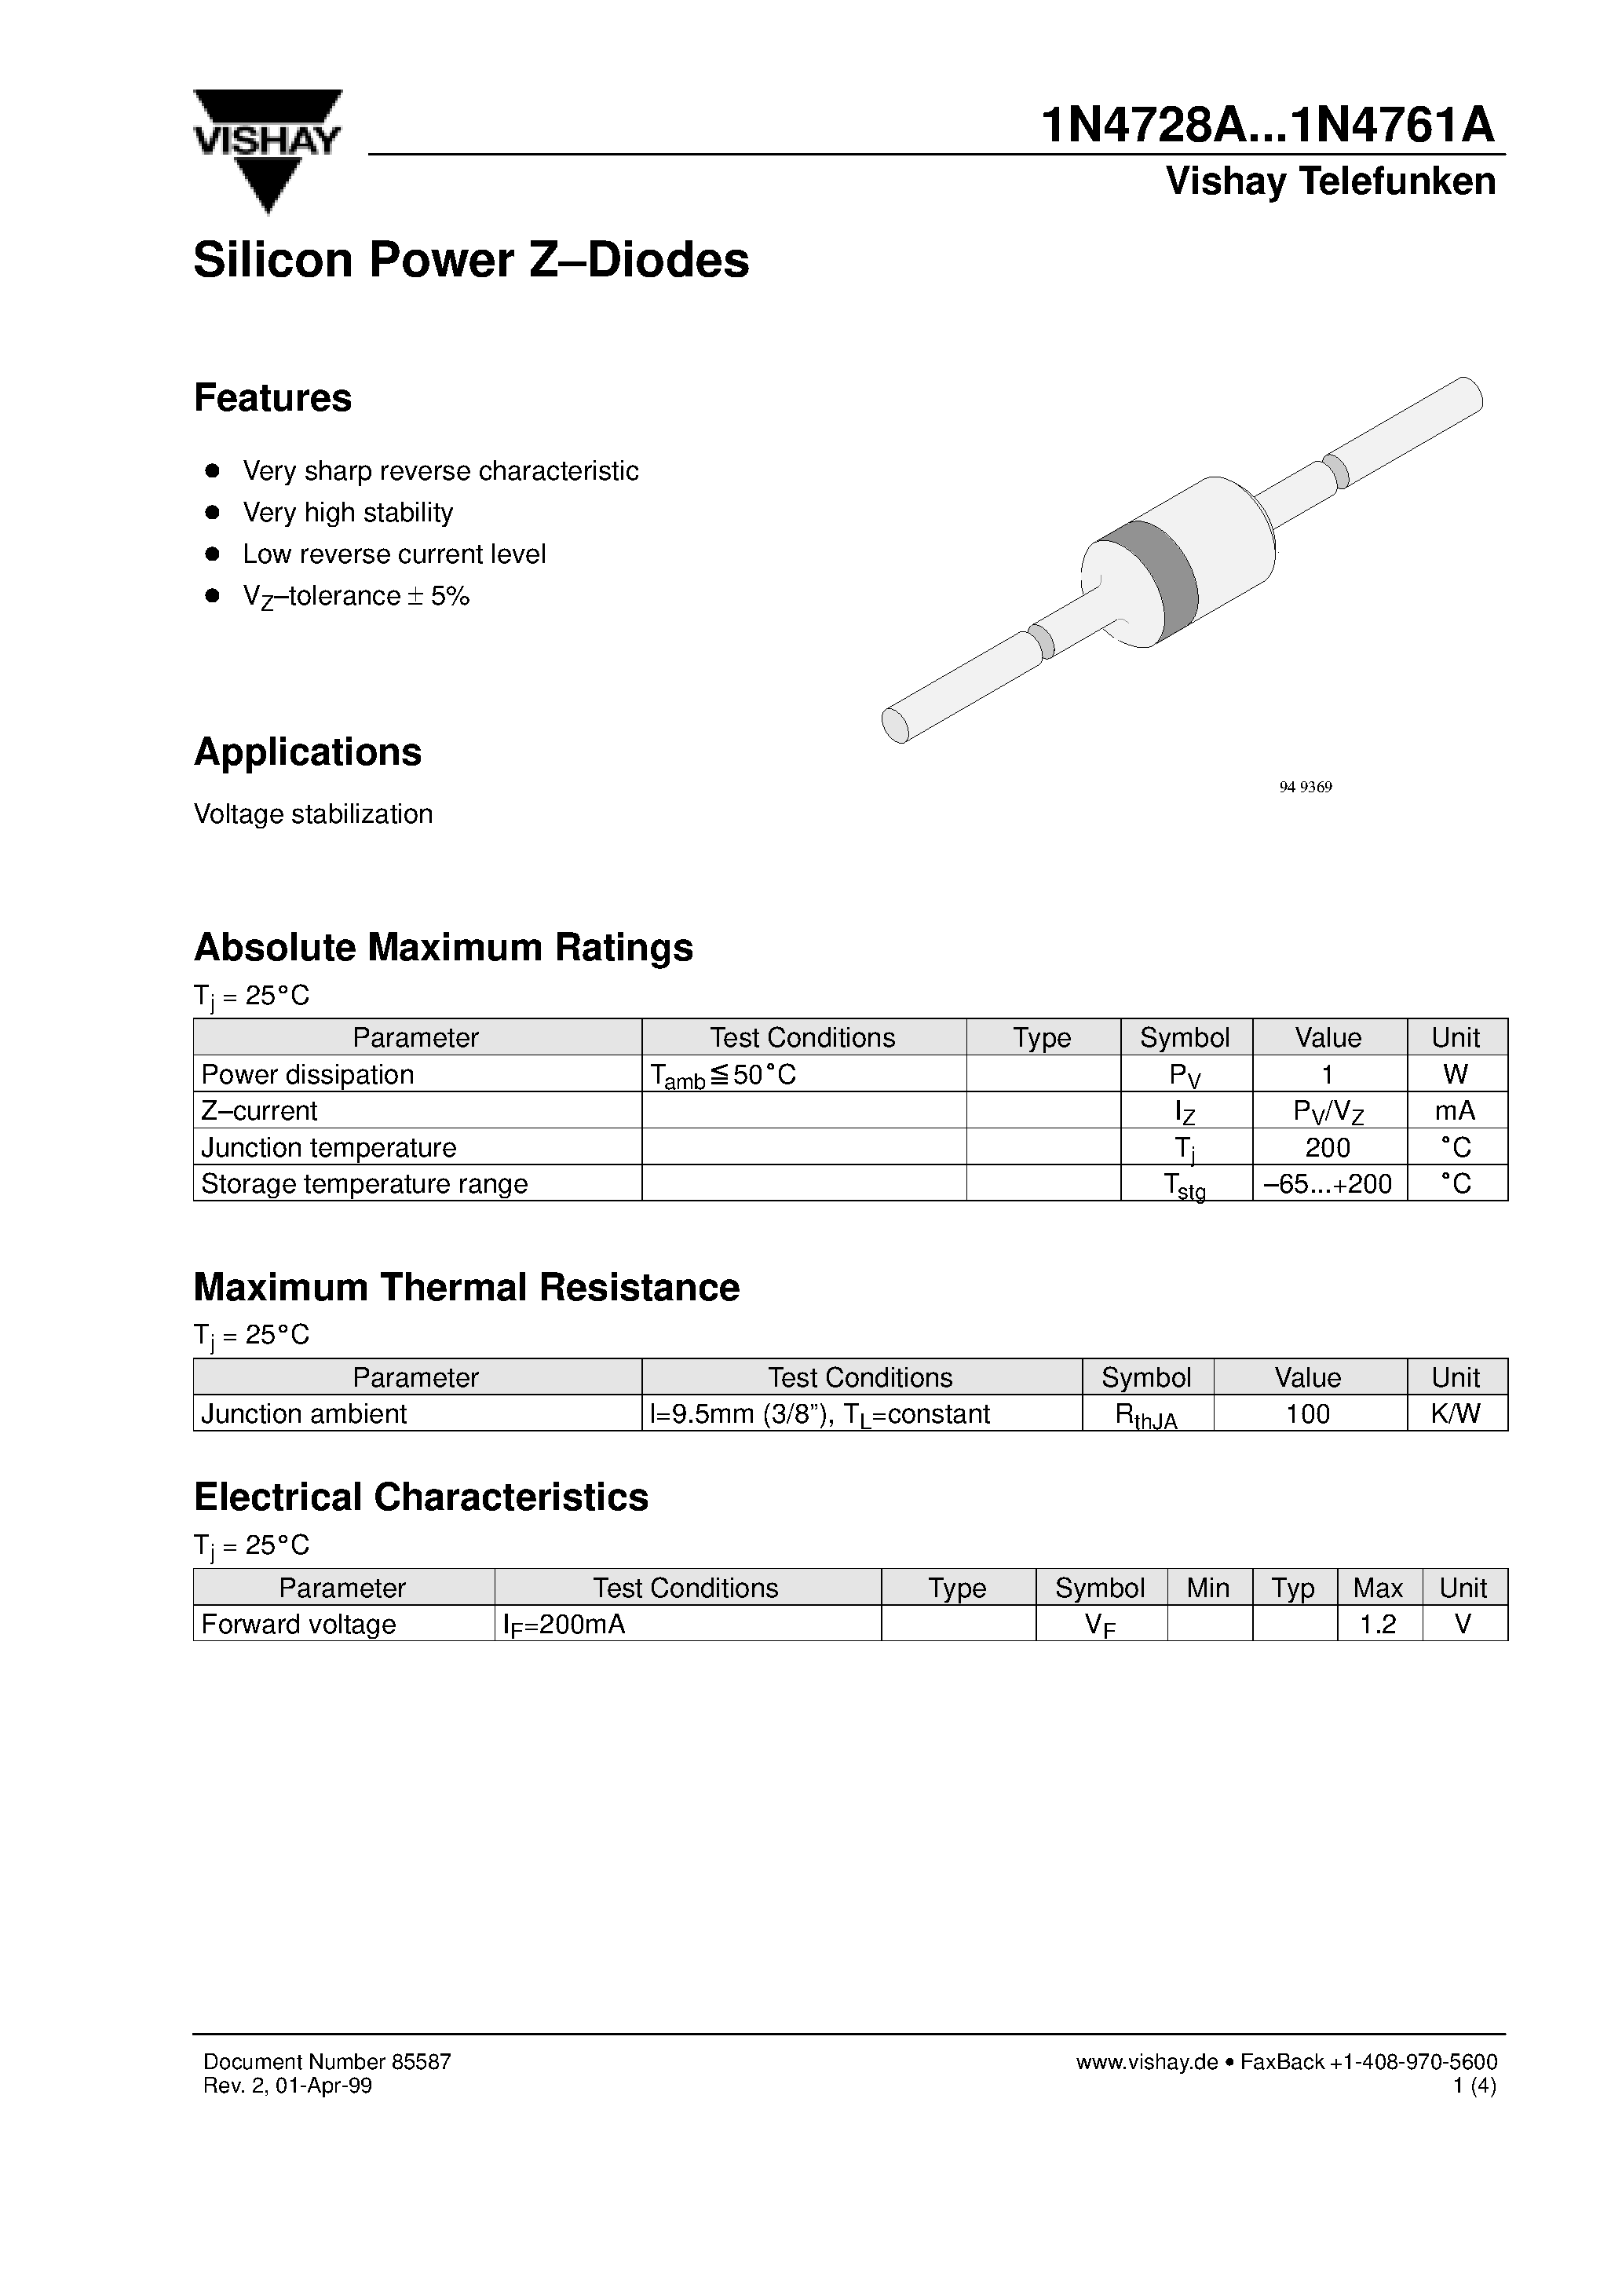 Даташит 1N4755A - Silicon Power Z-Diodes страница 1